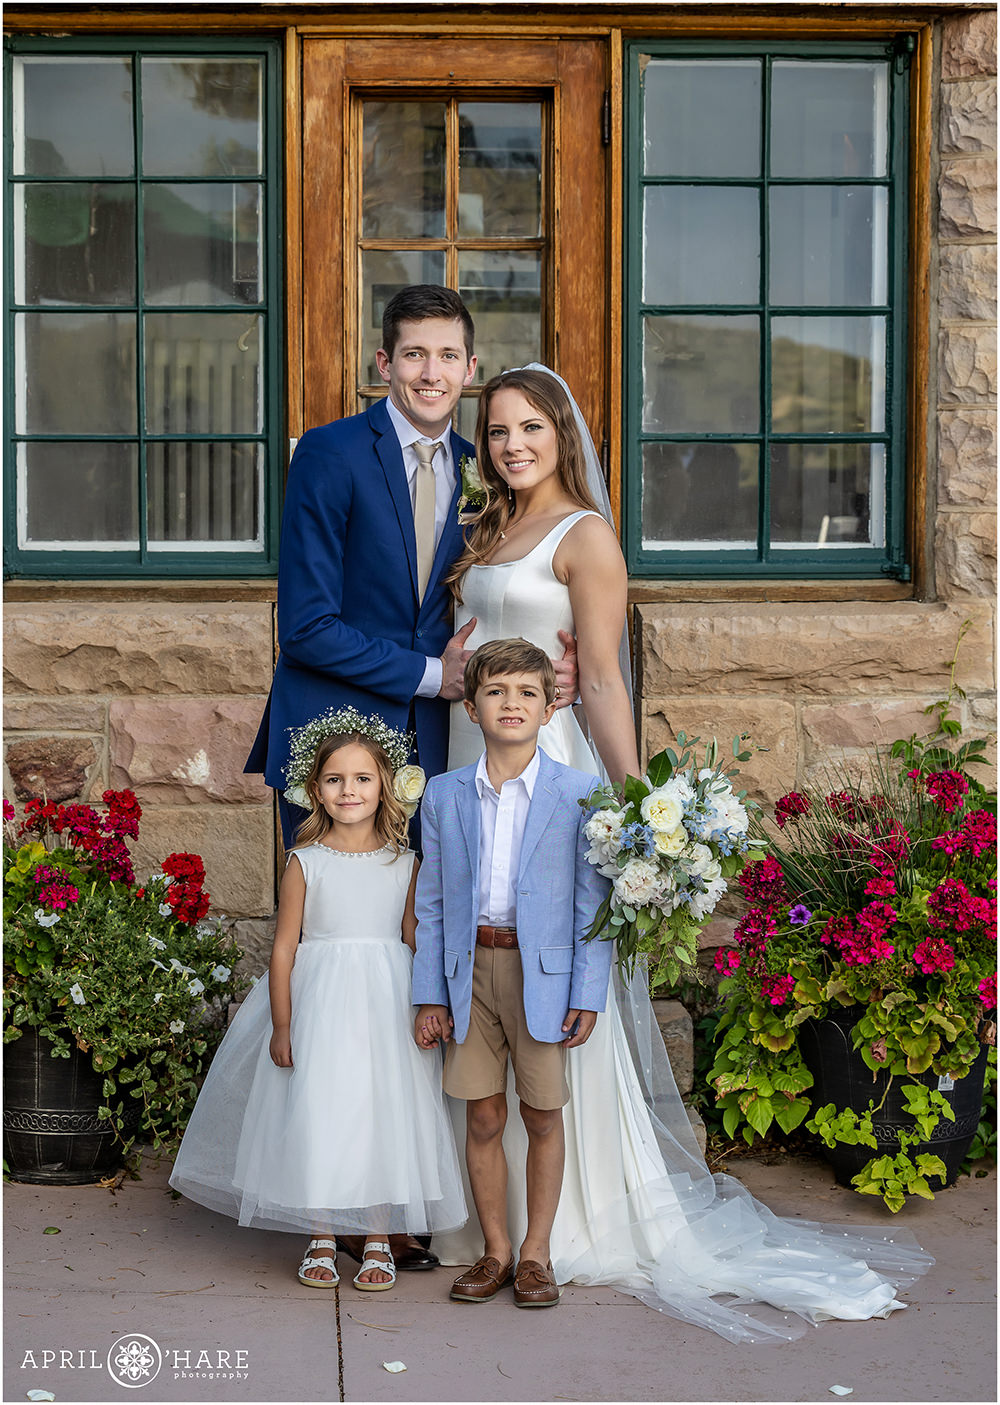 Bride and groom pose with the ring bearer and flower girl in the Castle Courtyard